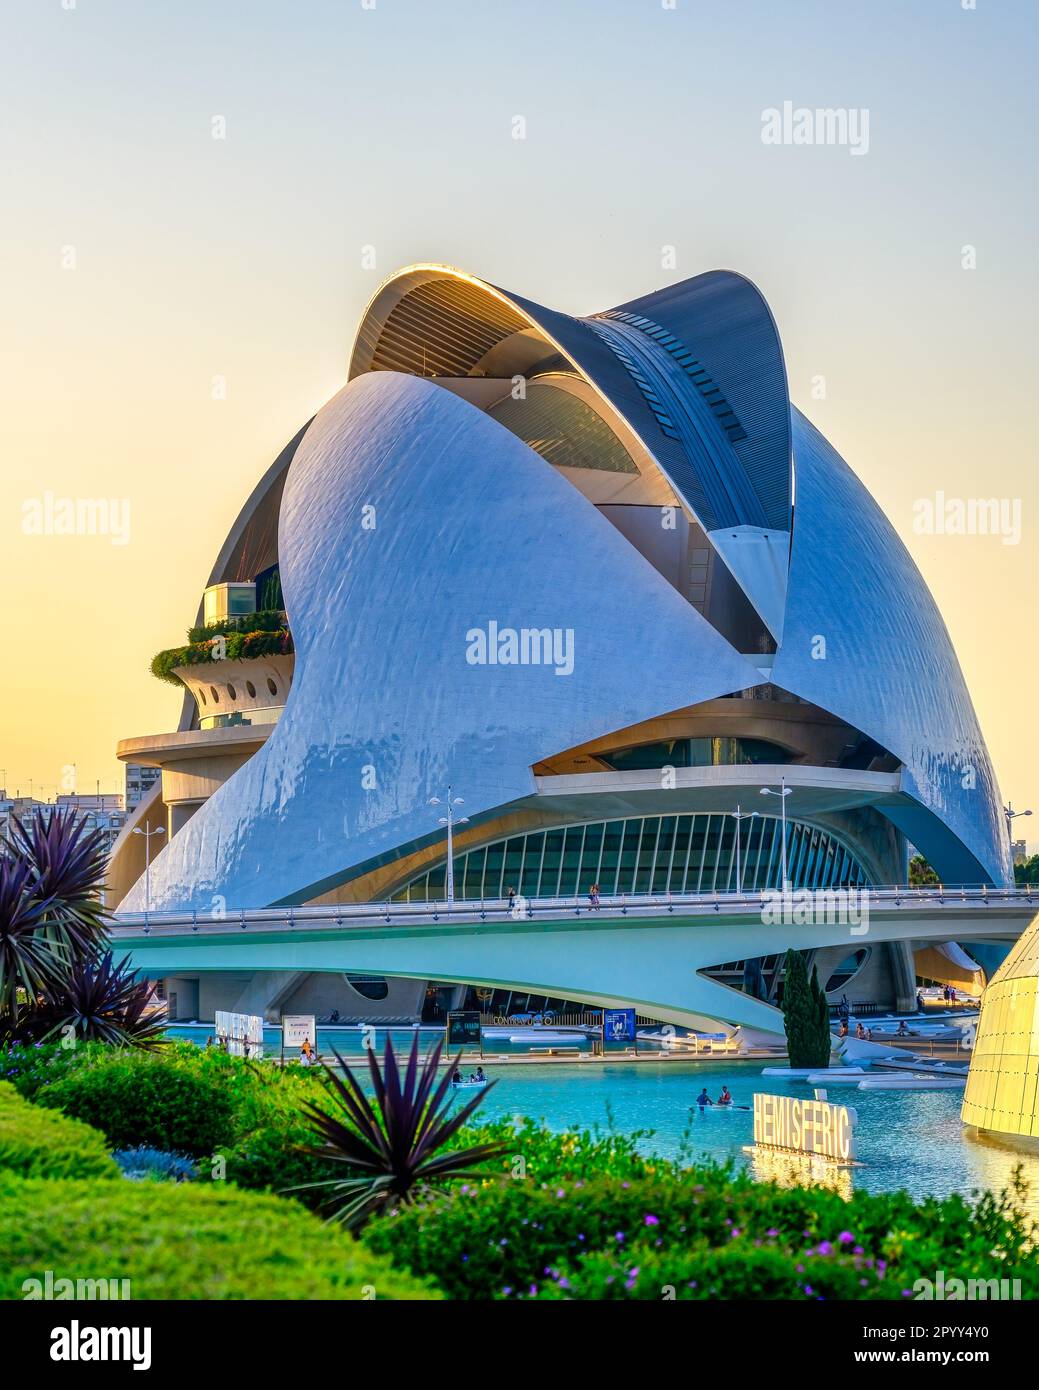 Valencia, Spain - July 17, 2022: Palau de les Arts or Palace. The famous building is framed in part of the exterior gardens. Stock Photo